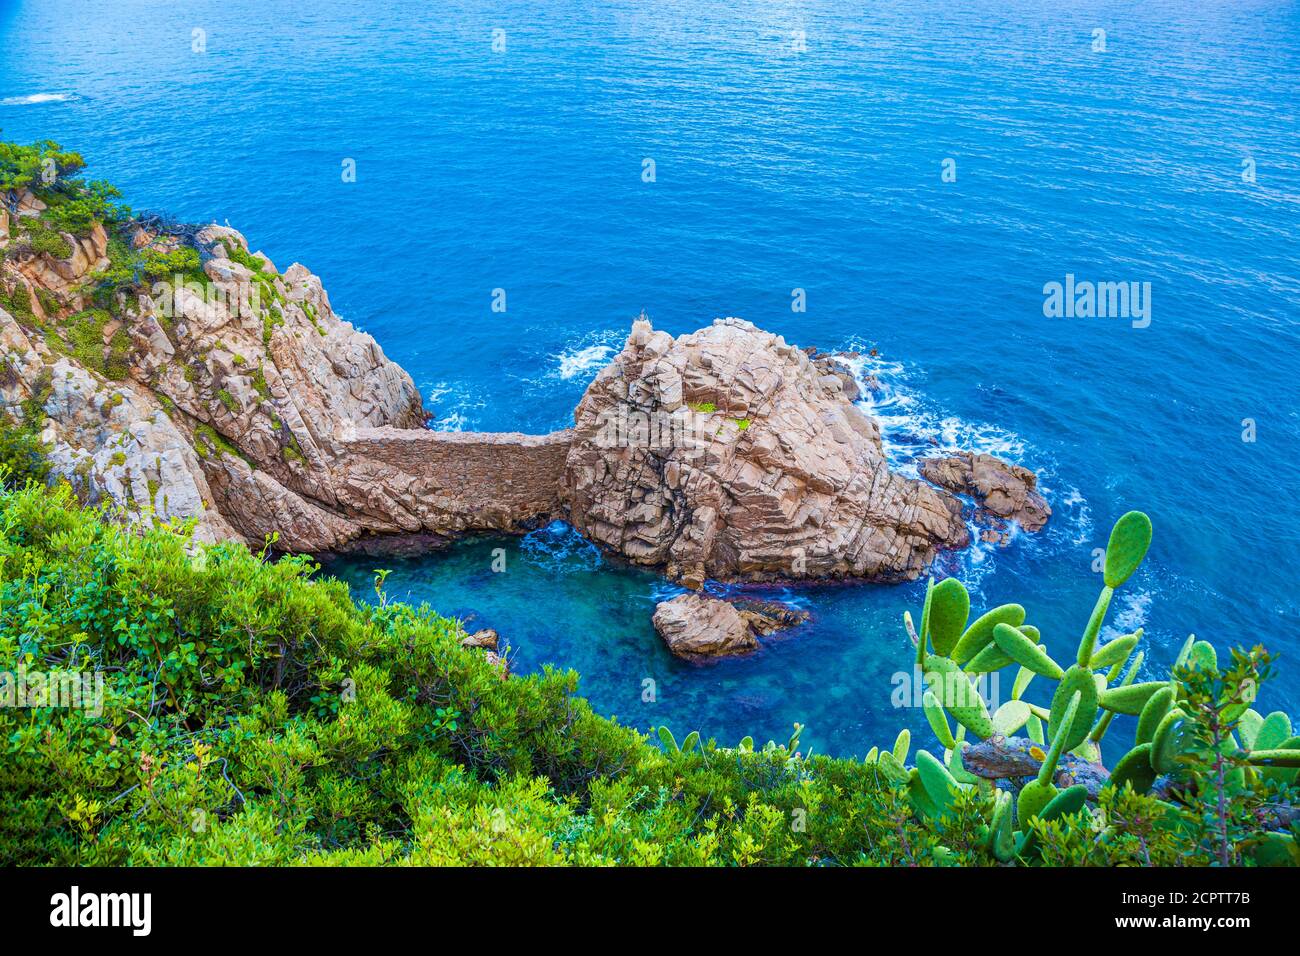 Costa Brava bay and beach with turquoise waters. Stock Photo